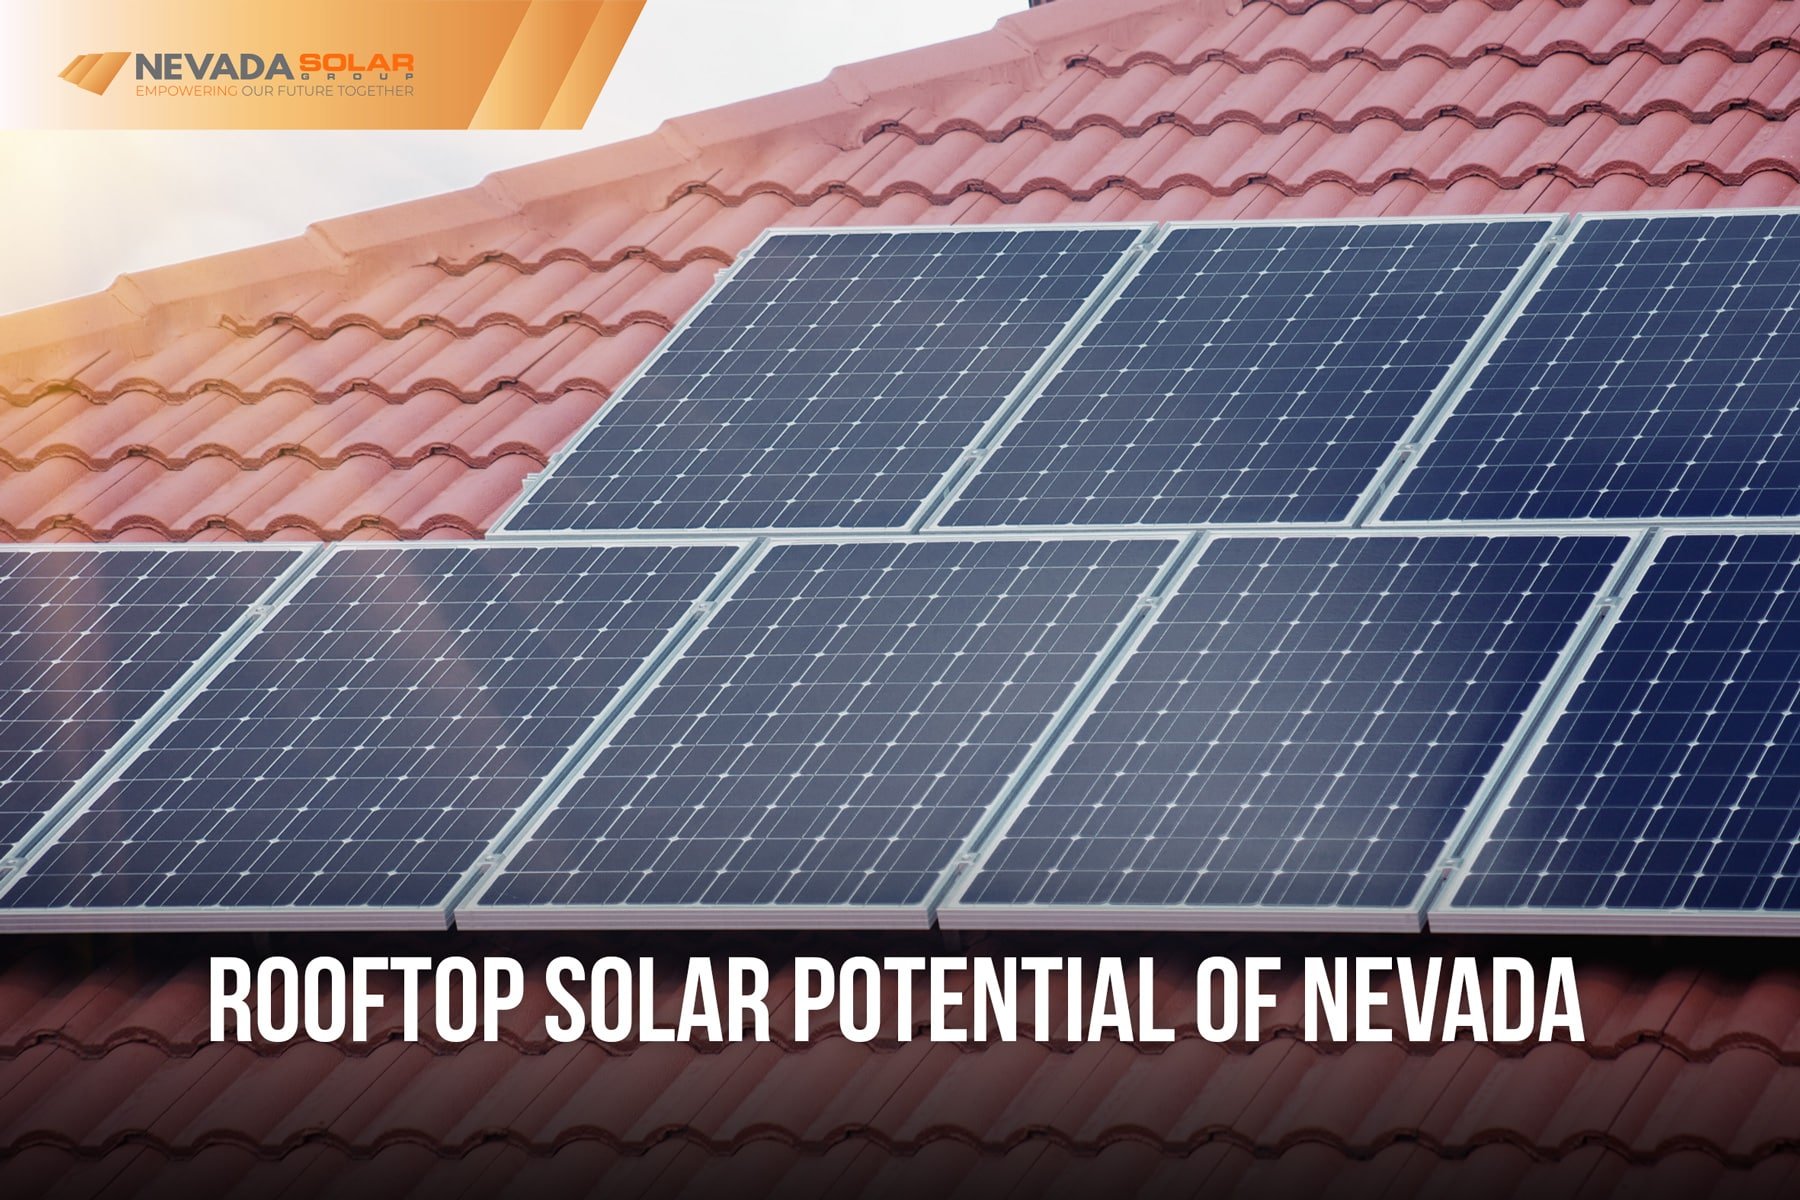 Solar-Panels-On-The-Roof